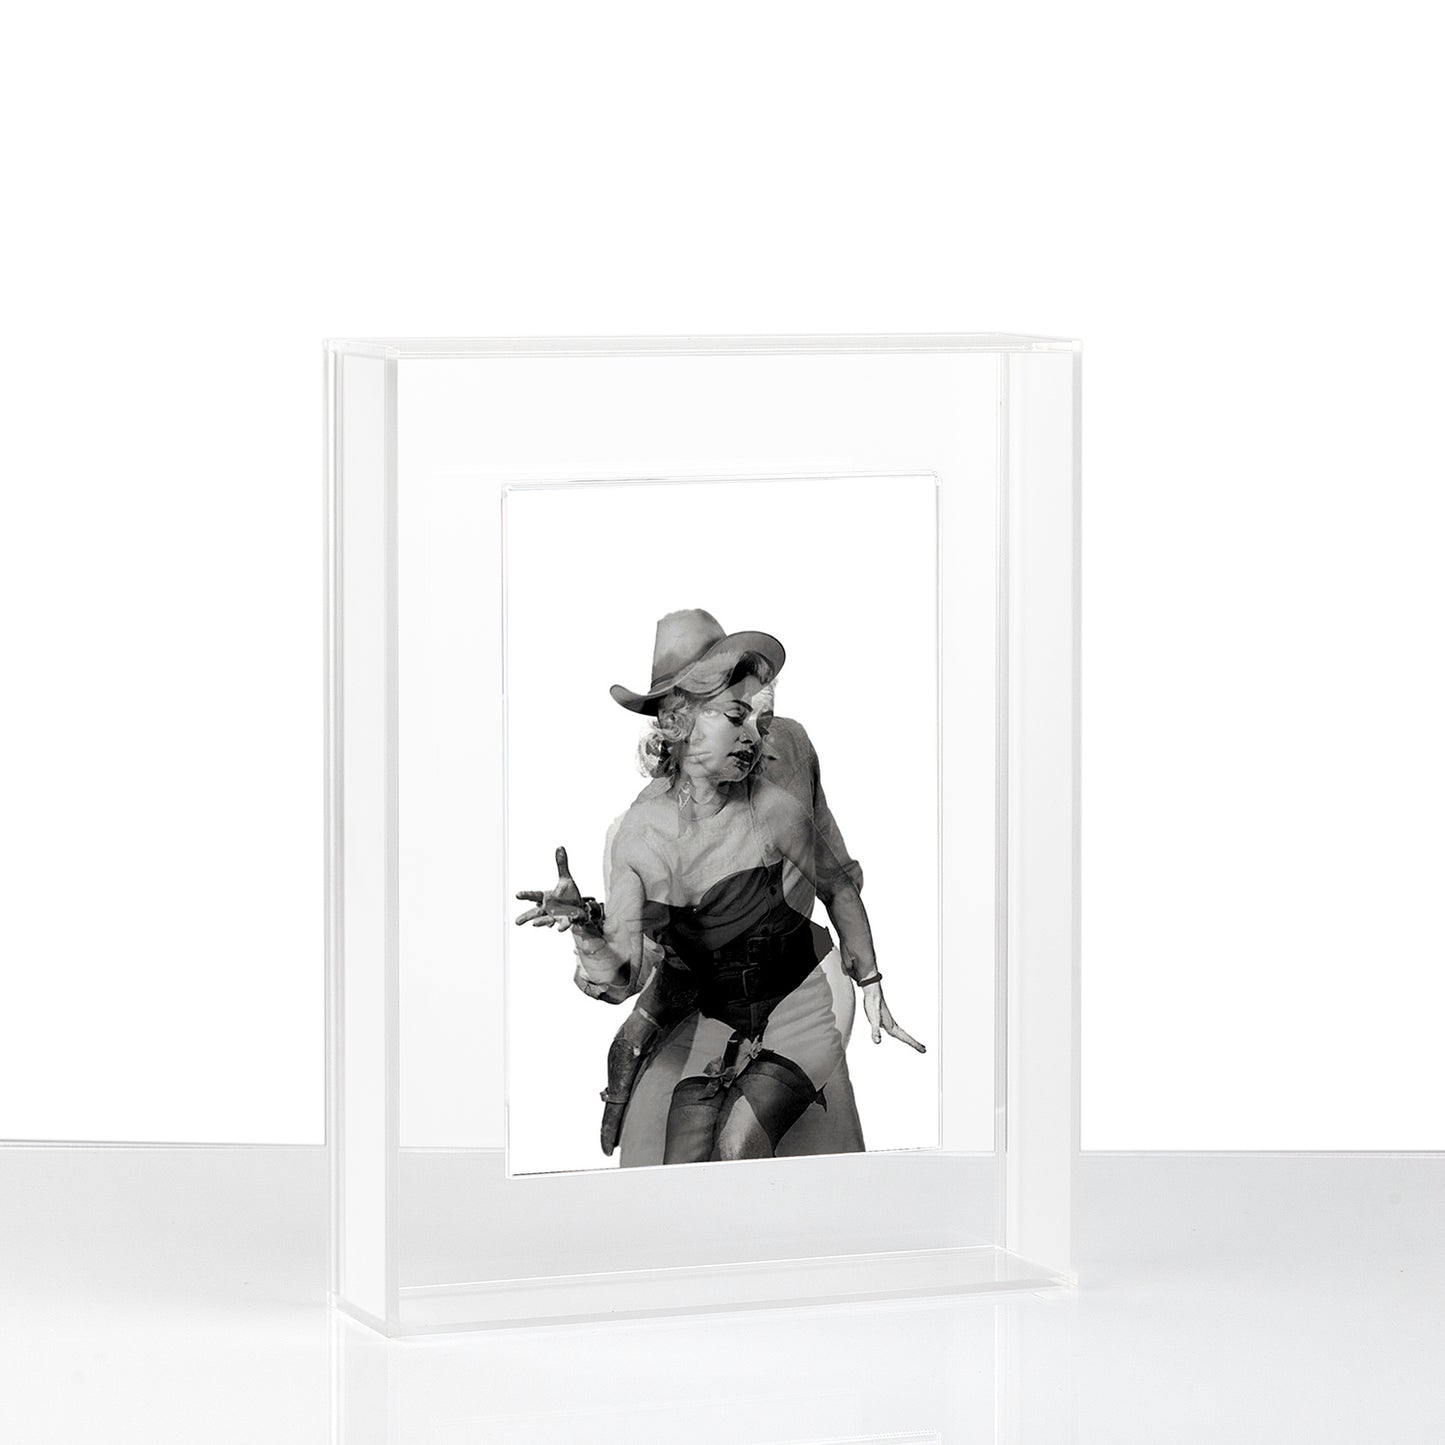 Steady Hands by B. Shawn Cox 4x6  Framed In Your Choice of Float Frame with Magnetic Photo Holder